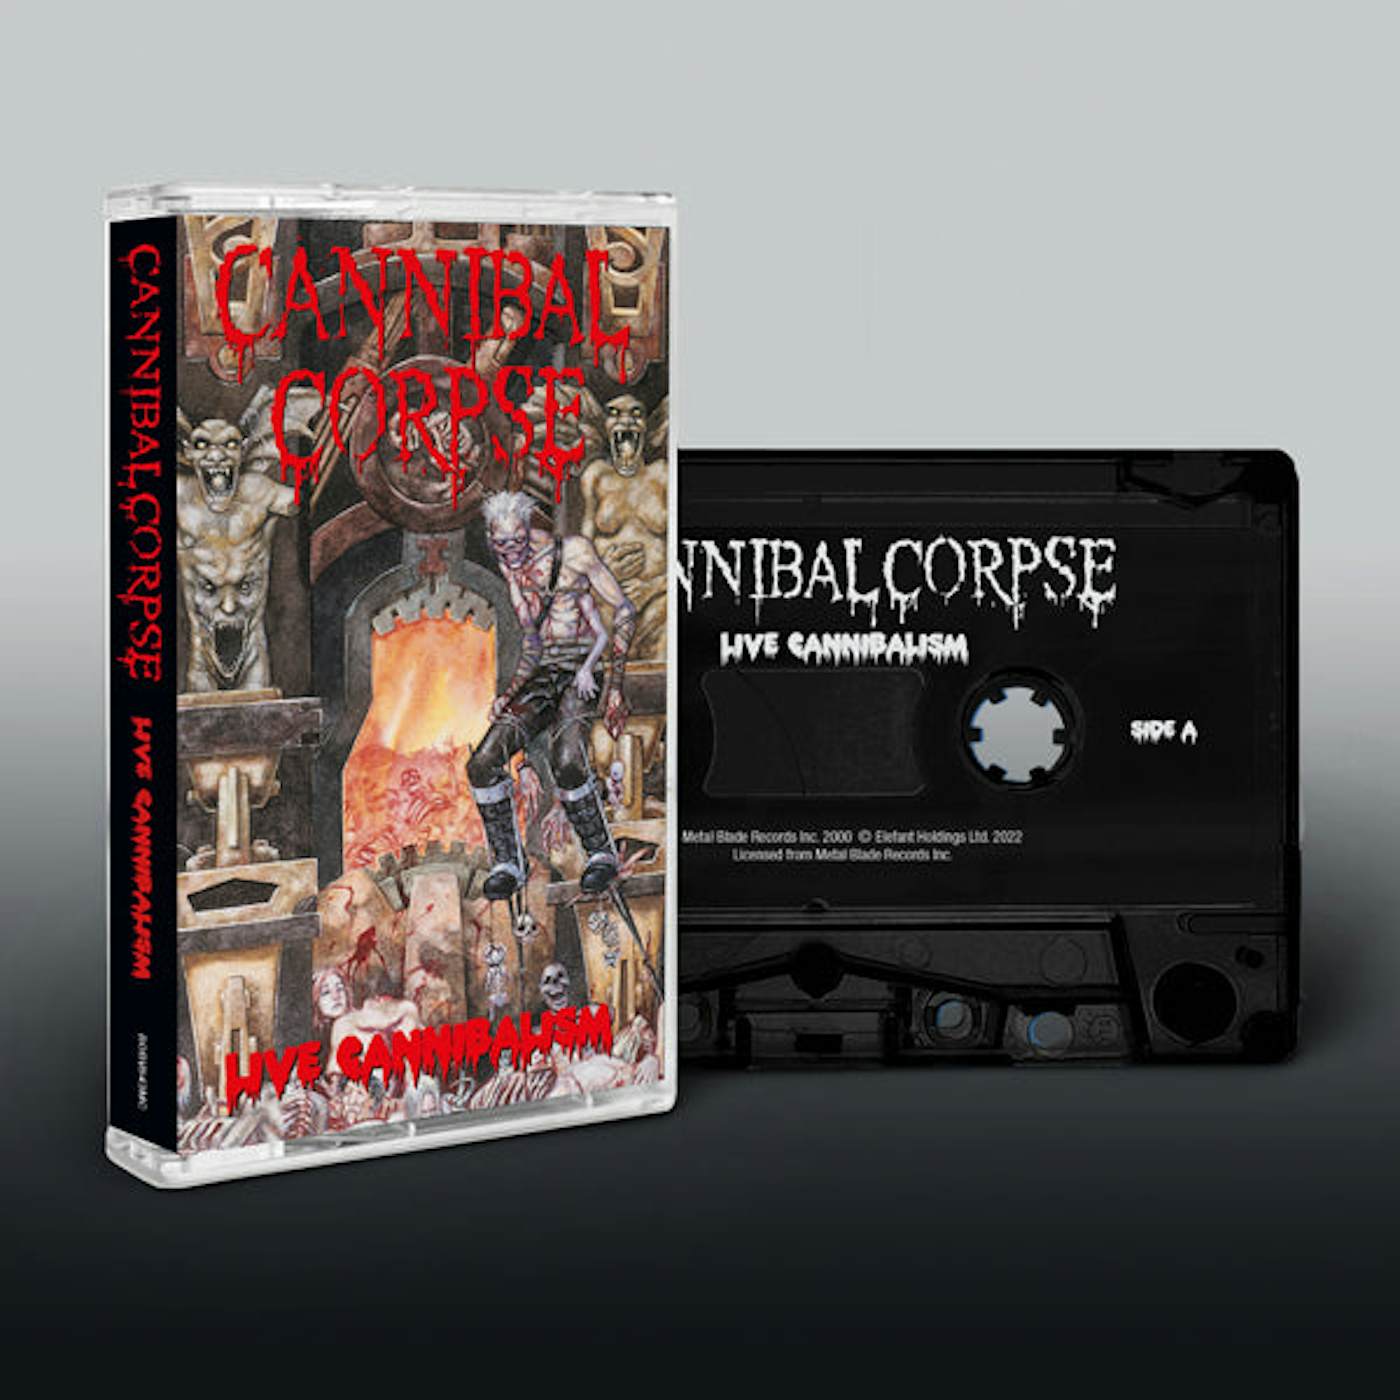 Cannibal Corpse Music Cassette - Live Cannibalism